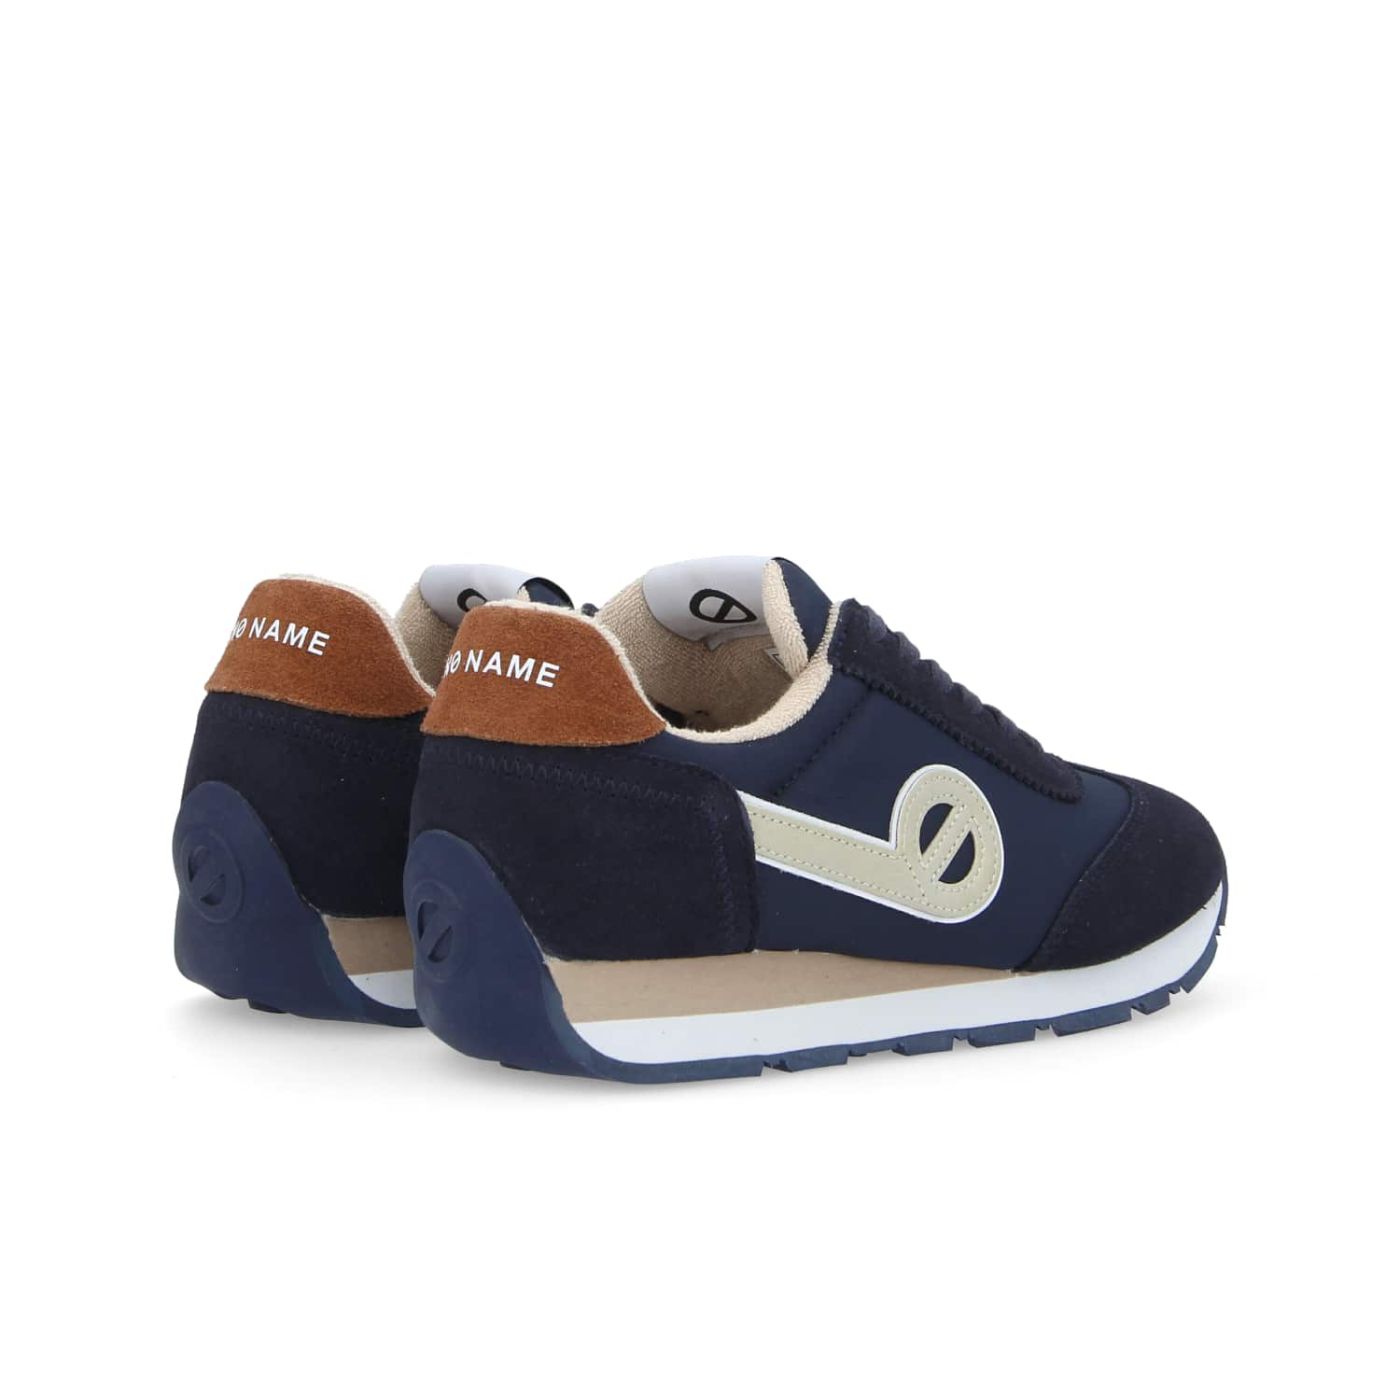 CITY RUN JOGGER - SUEDE/SQUARE - NAVY/NAVY